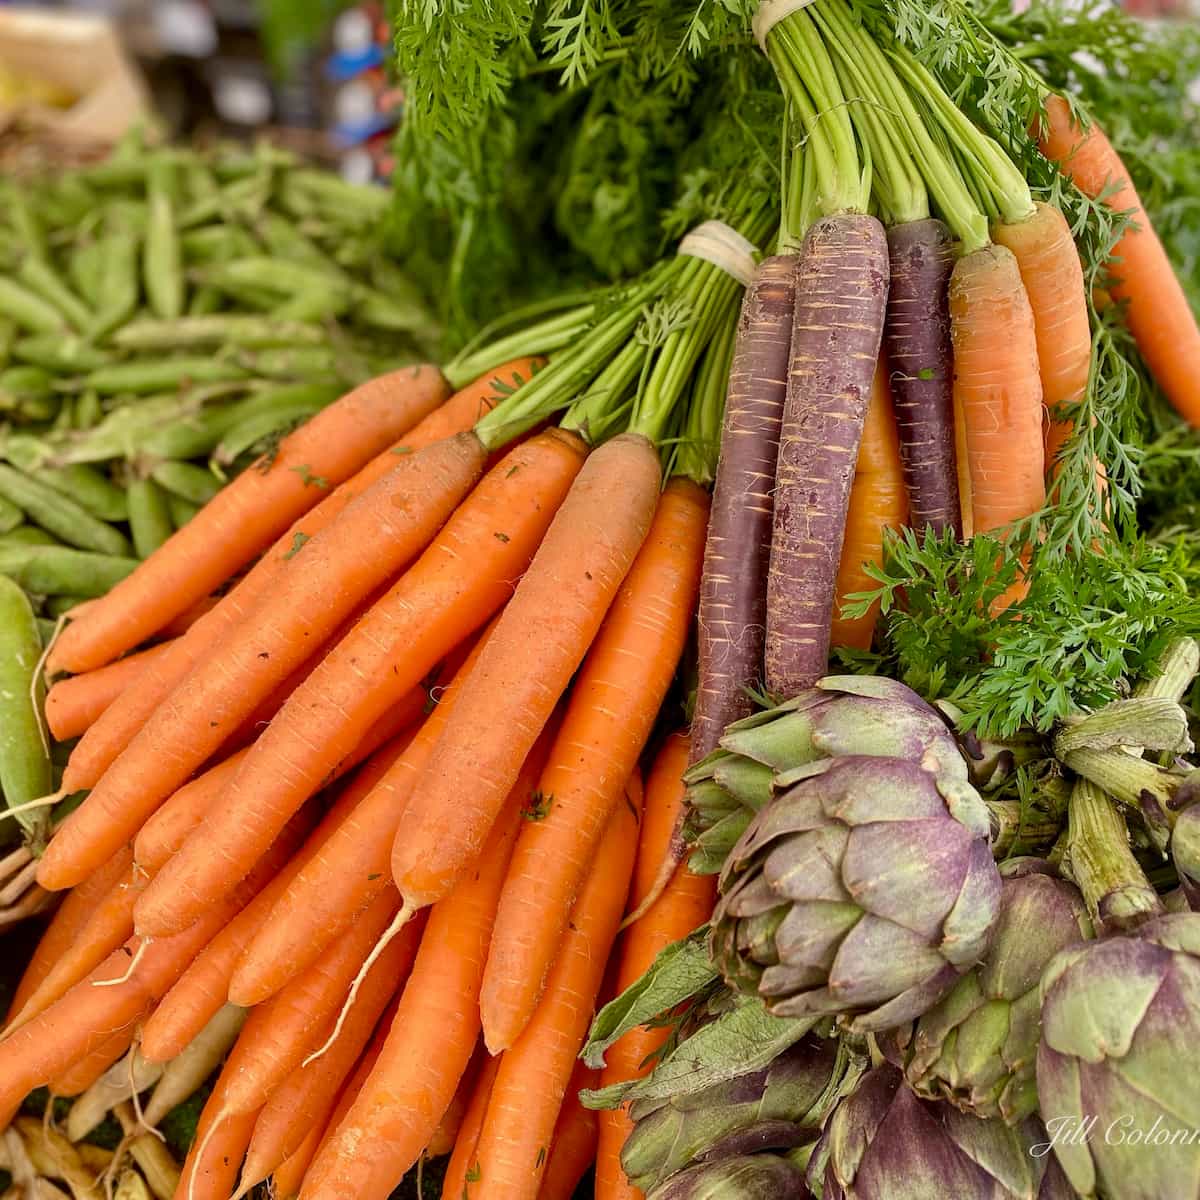 bunch of orange and mixed coloured carrots at the market